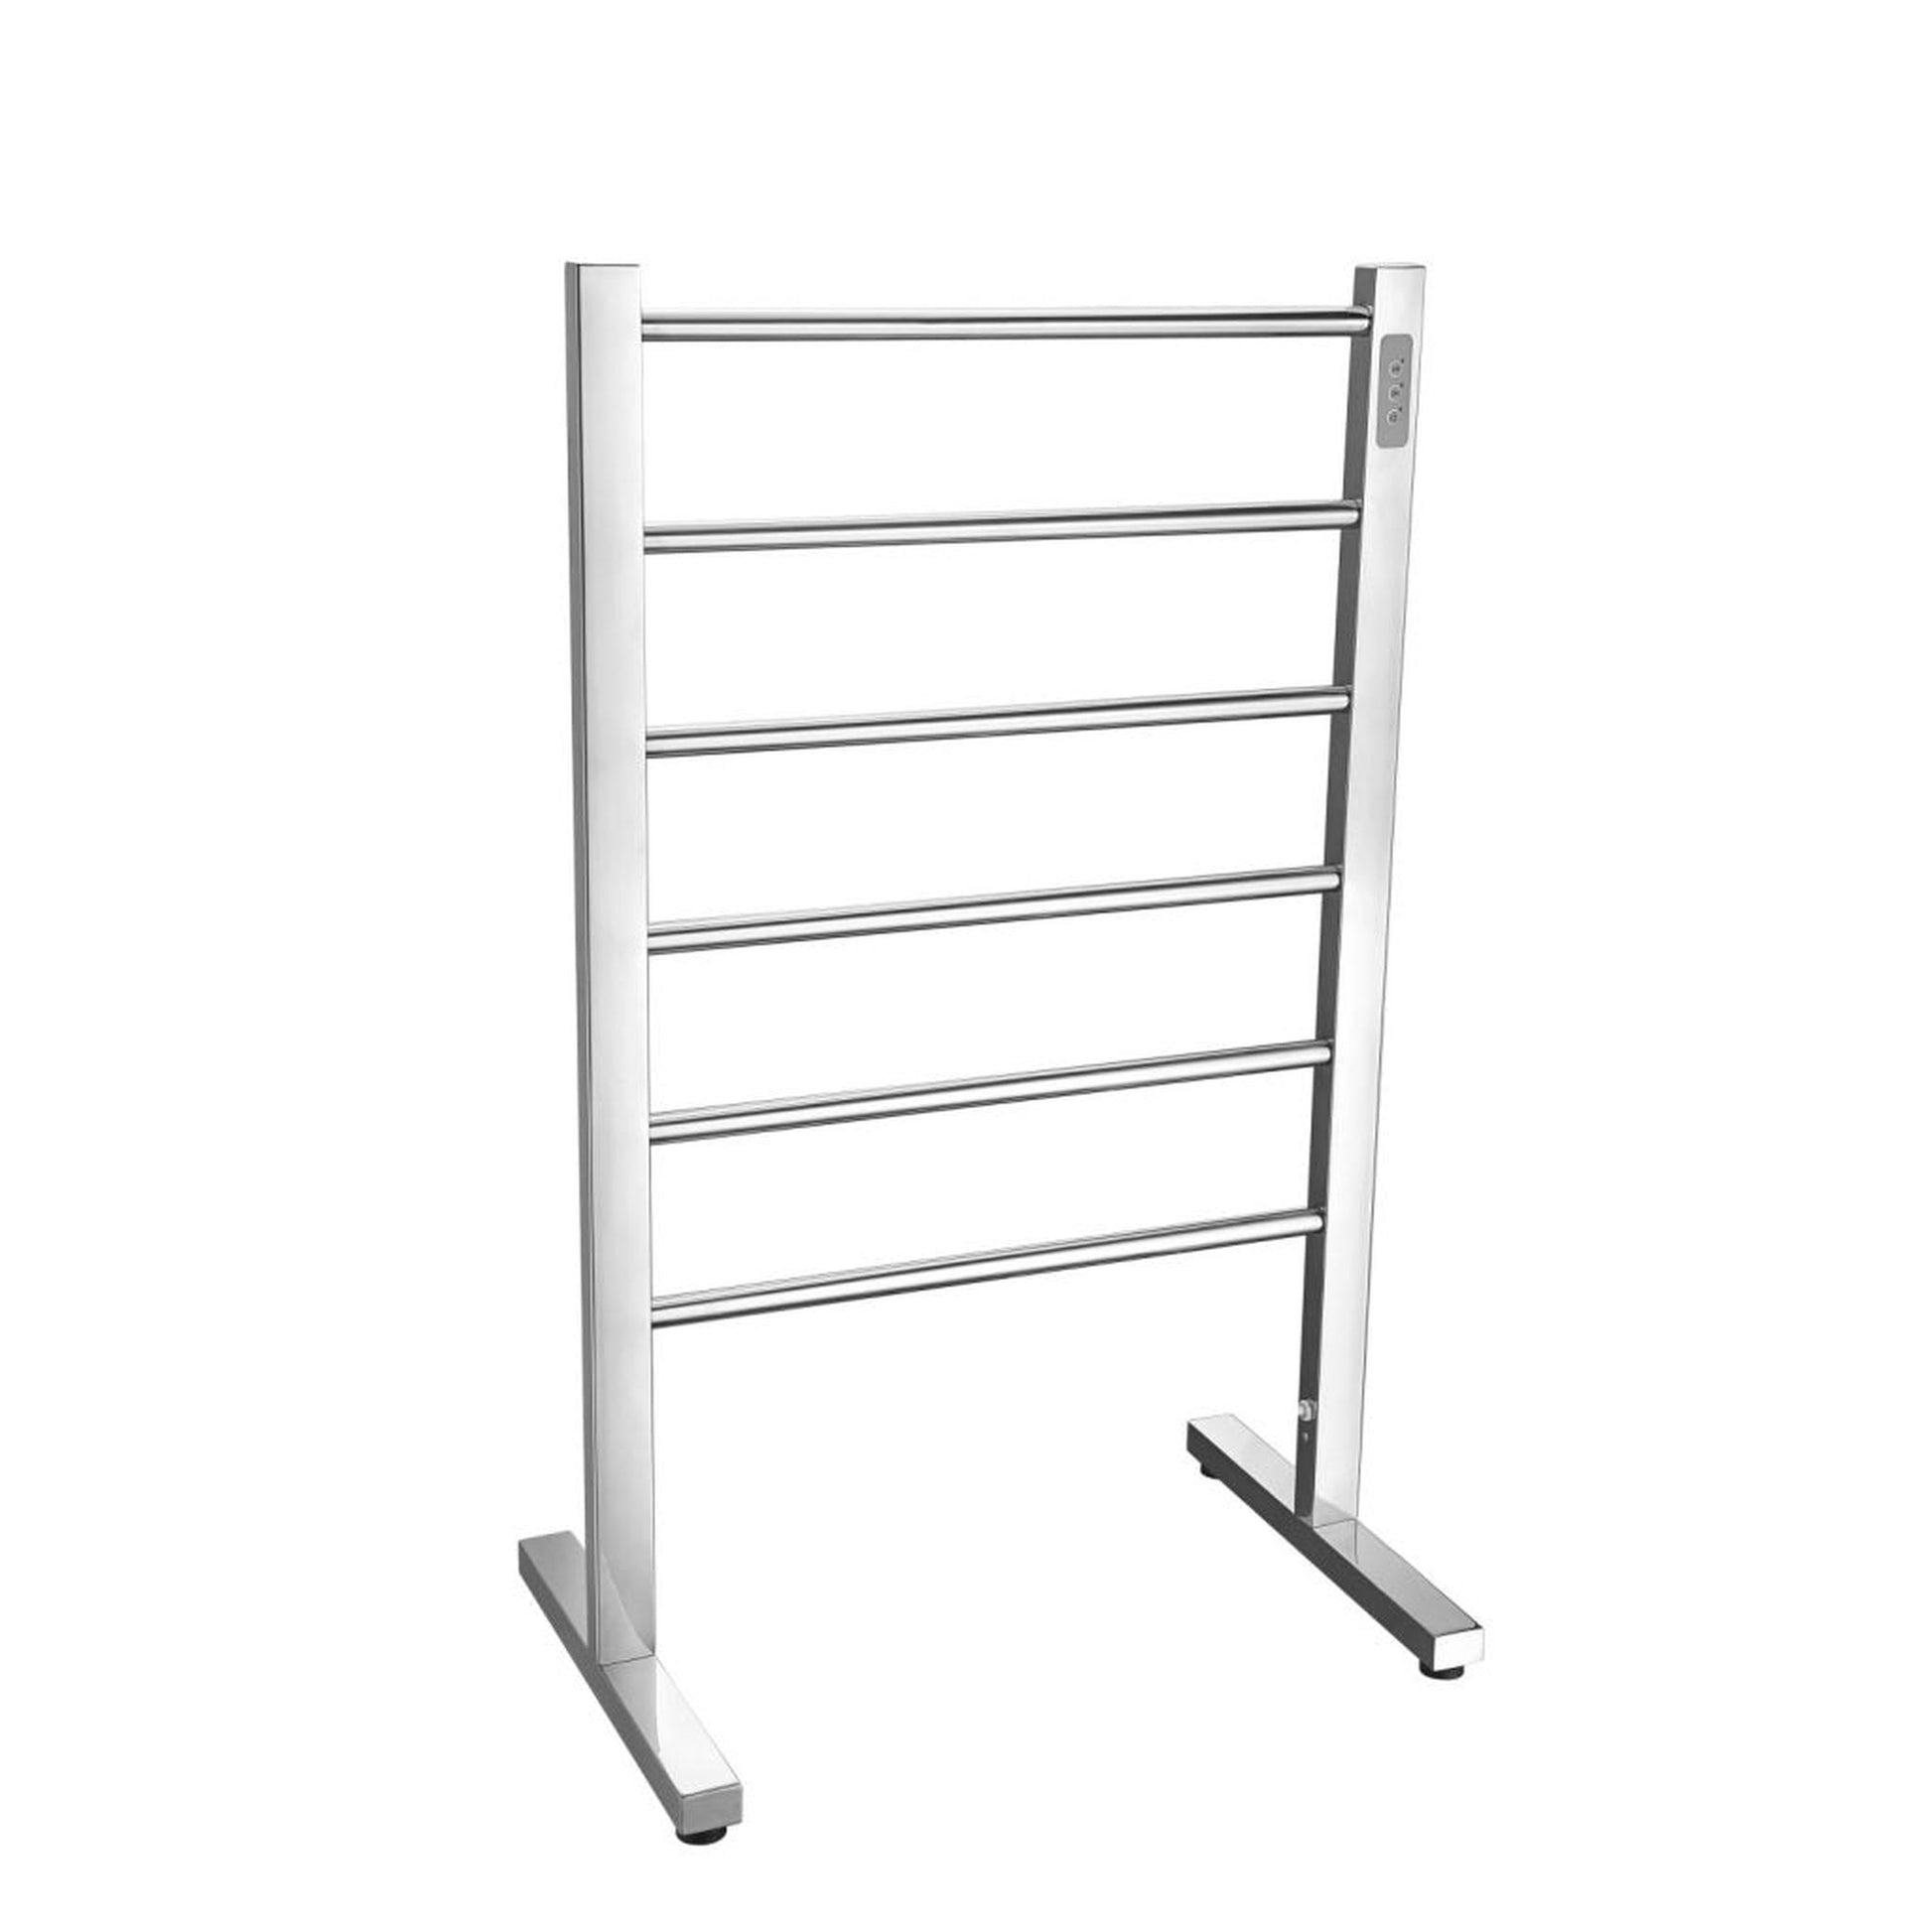 ANZZI Kiln Series 6-Bar Polished Chrome Stainless Steel Floor Mounted Electric Towel Warmer Rack